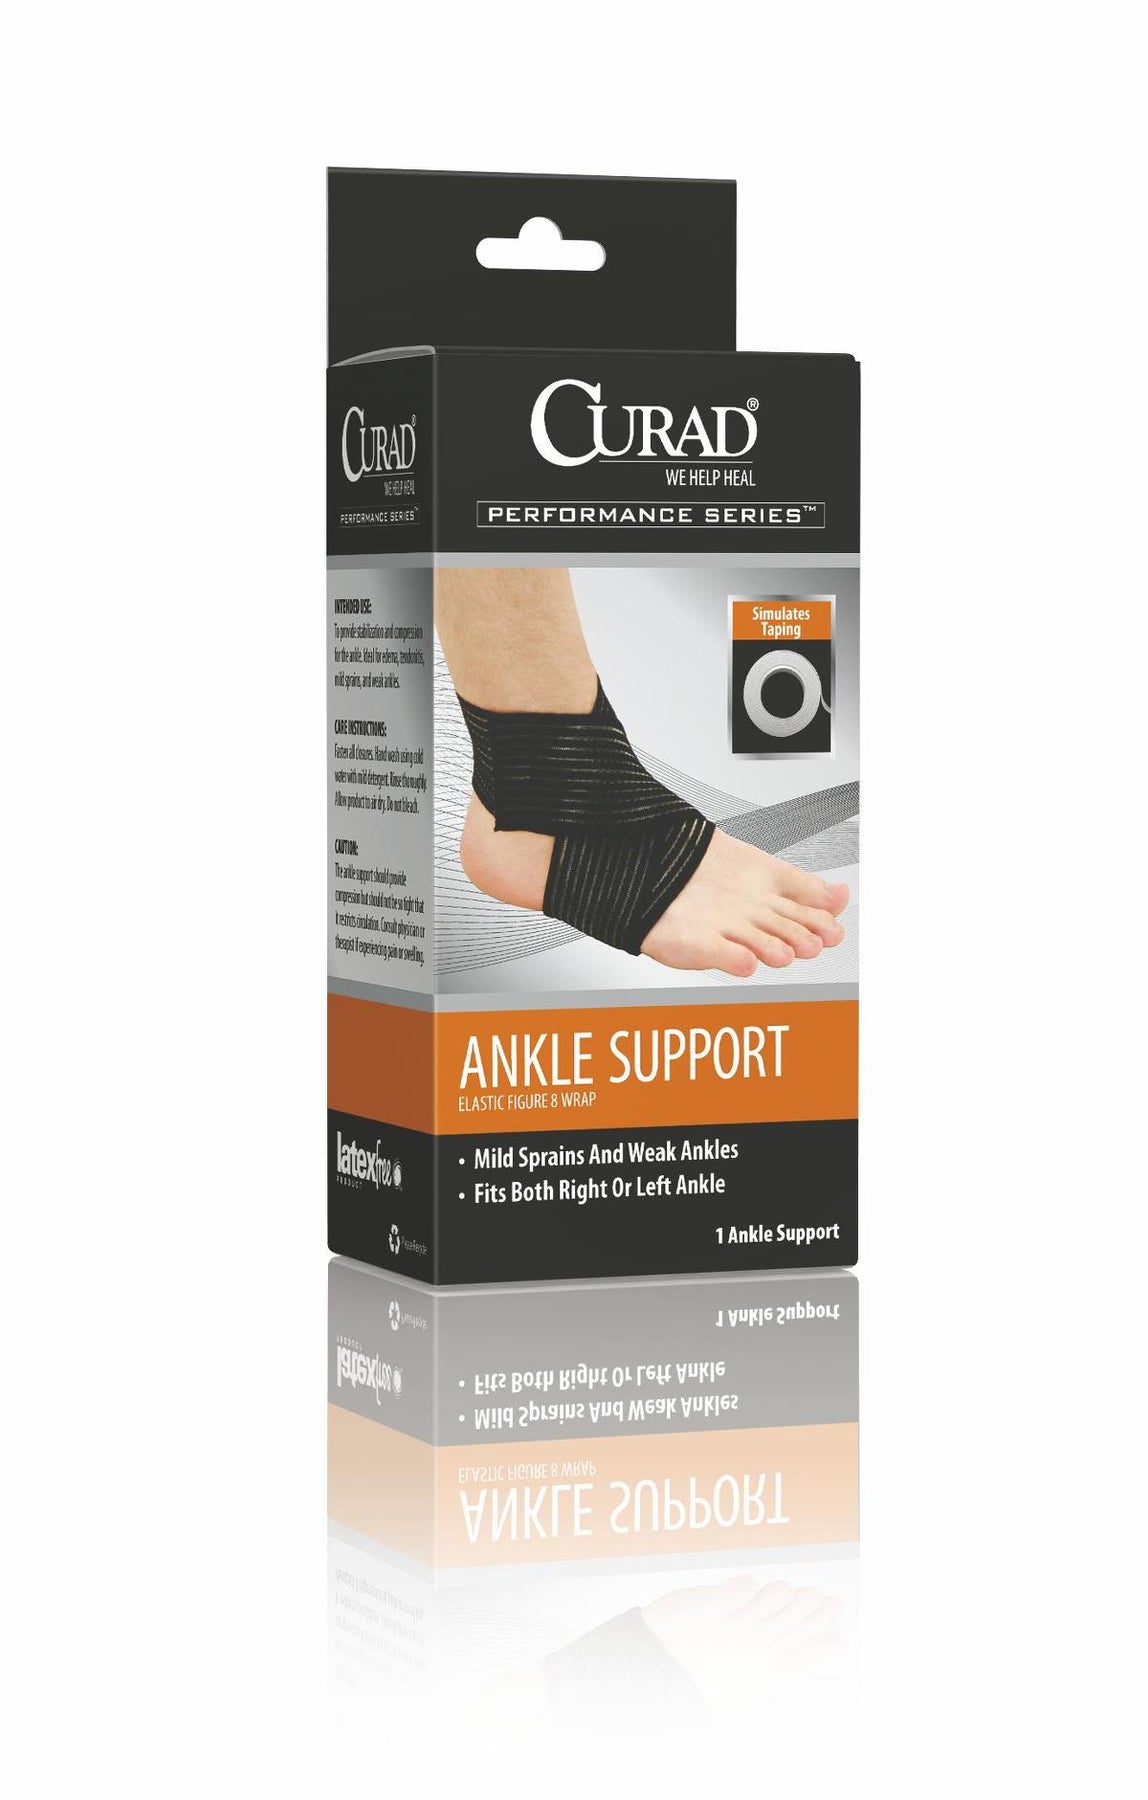 Ankle Sleeve with Optional Figure 8 Wrap Application Instructions